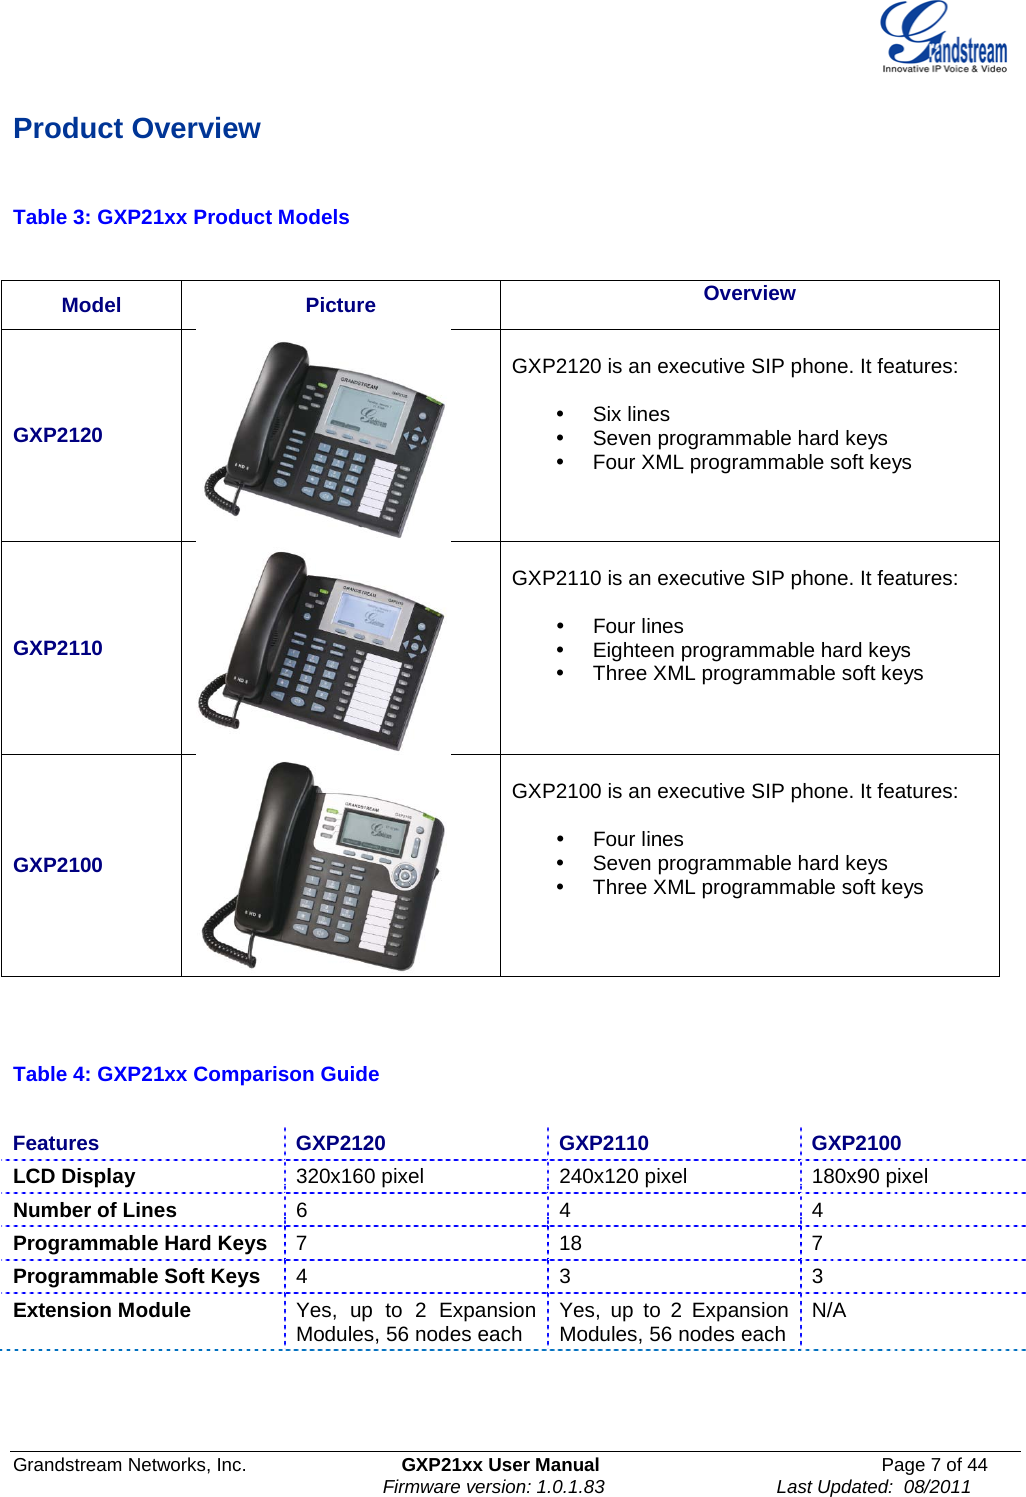  Grandstream Networks, Inc. GXP21xx User Manual Page 7 of 44                                                              Firmware version: 1.0.1.83                                 Last Updated:  08/2011  Product Overview  Table 3: GXP21xx Product Models   Model Picture Overview  GXP2120   GXP2120 is an executive SIP phone. It features:   Six lines  Seven programmable hard keys   Four XML programmable soft keys  GXP2110   GXP2110 is an executive SIP phone. It features:   Four lines  Eighteen programmable hard keys   Three XML programmable soft keys GXP2100   GXP2100 is an executive SIP phone. It features:   Four lines  Seven programmable hard keys   Three XML programmable soft keys   Table 4: GXP21xx Comparison Guide  Features GXP2120 GXP2110  GXP2100 LCD Display 320x160 pixel 240x120 pixel 180x90 pixel  Number of Lines 6 4  4 Programmable Hard Keys 7  18  7 Programmable Soft Keys 4  3  3 Extension Module  Yes, up to 2 Expansion Modules, 56 nodes each Yes, up to 2 Expansion Modules, 56 nodes each N/A     